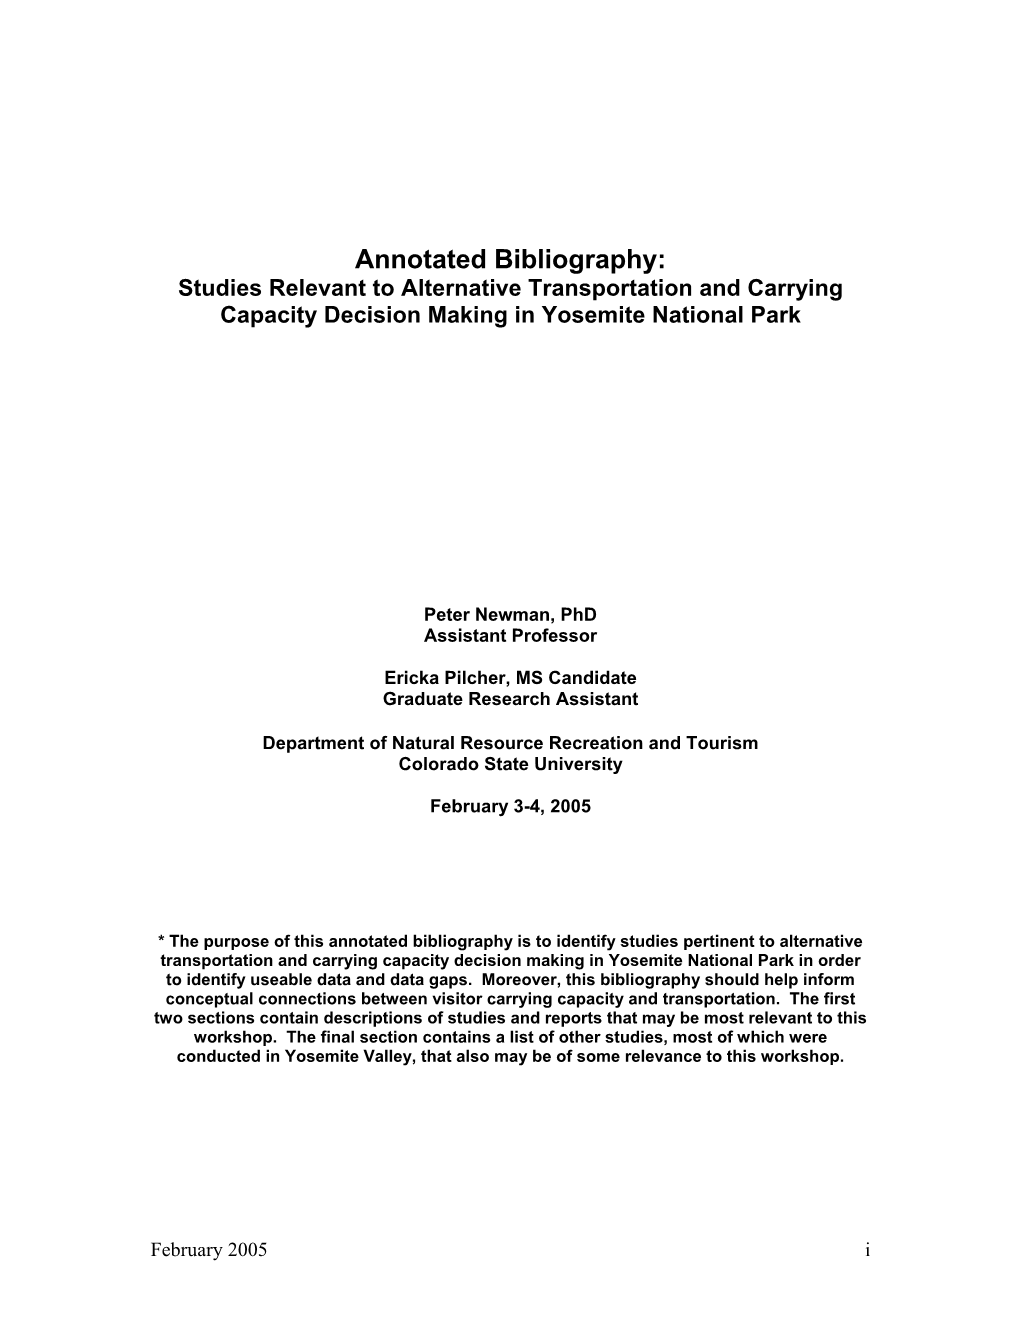 Annotated Bibliography: Studies Relevant to Alternative Transportation and Carrying Capacity Decision Making in Yosemite National Park